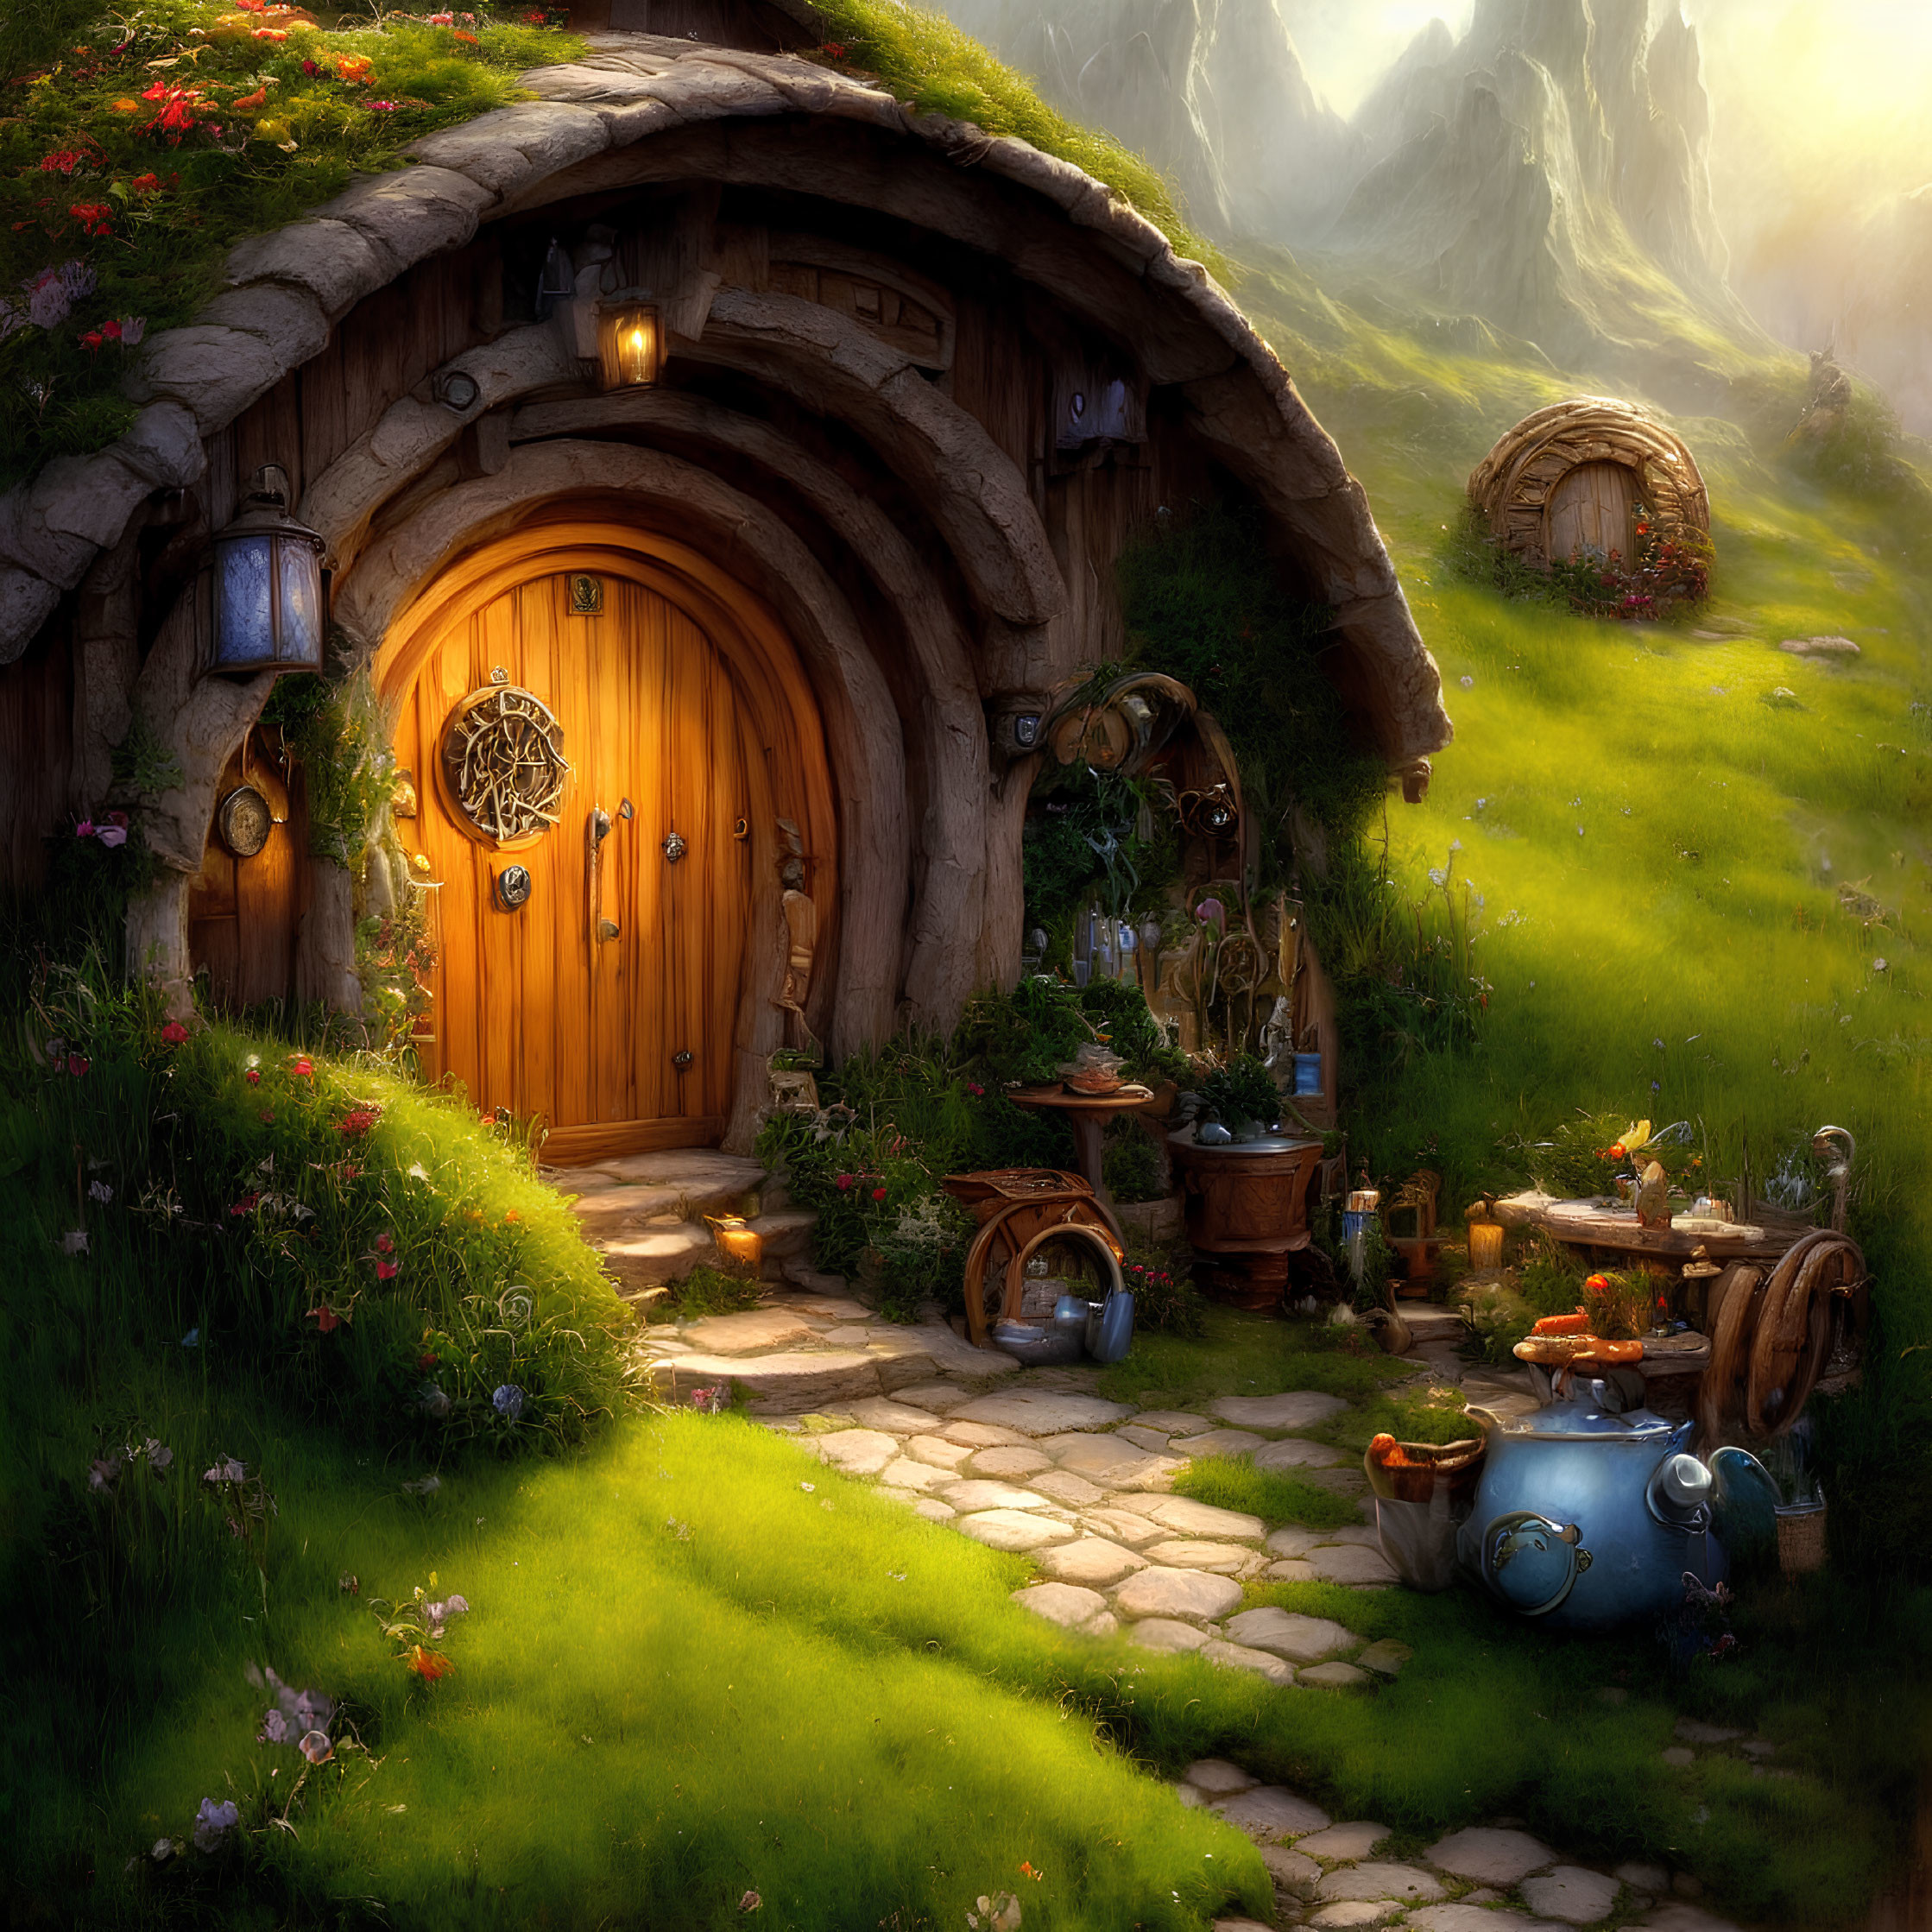 Whimsical hobbit house with round door in lush green hill